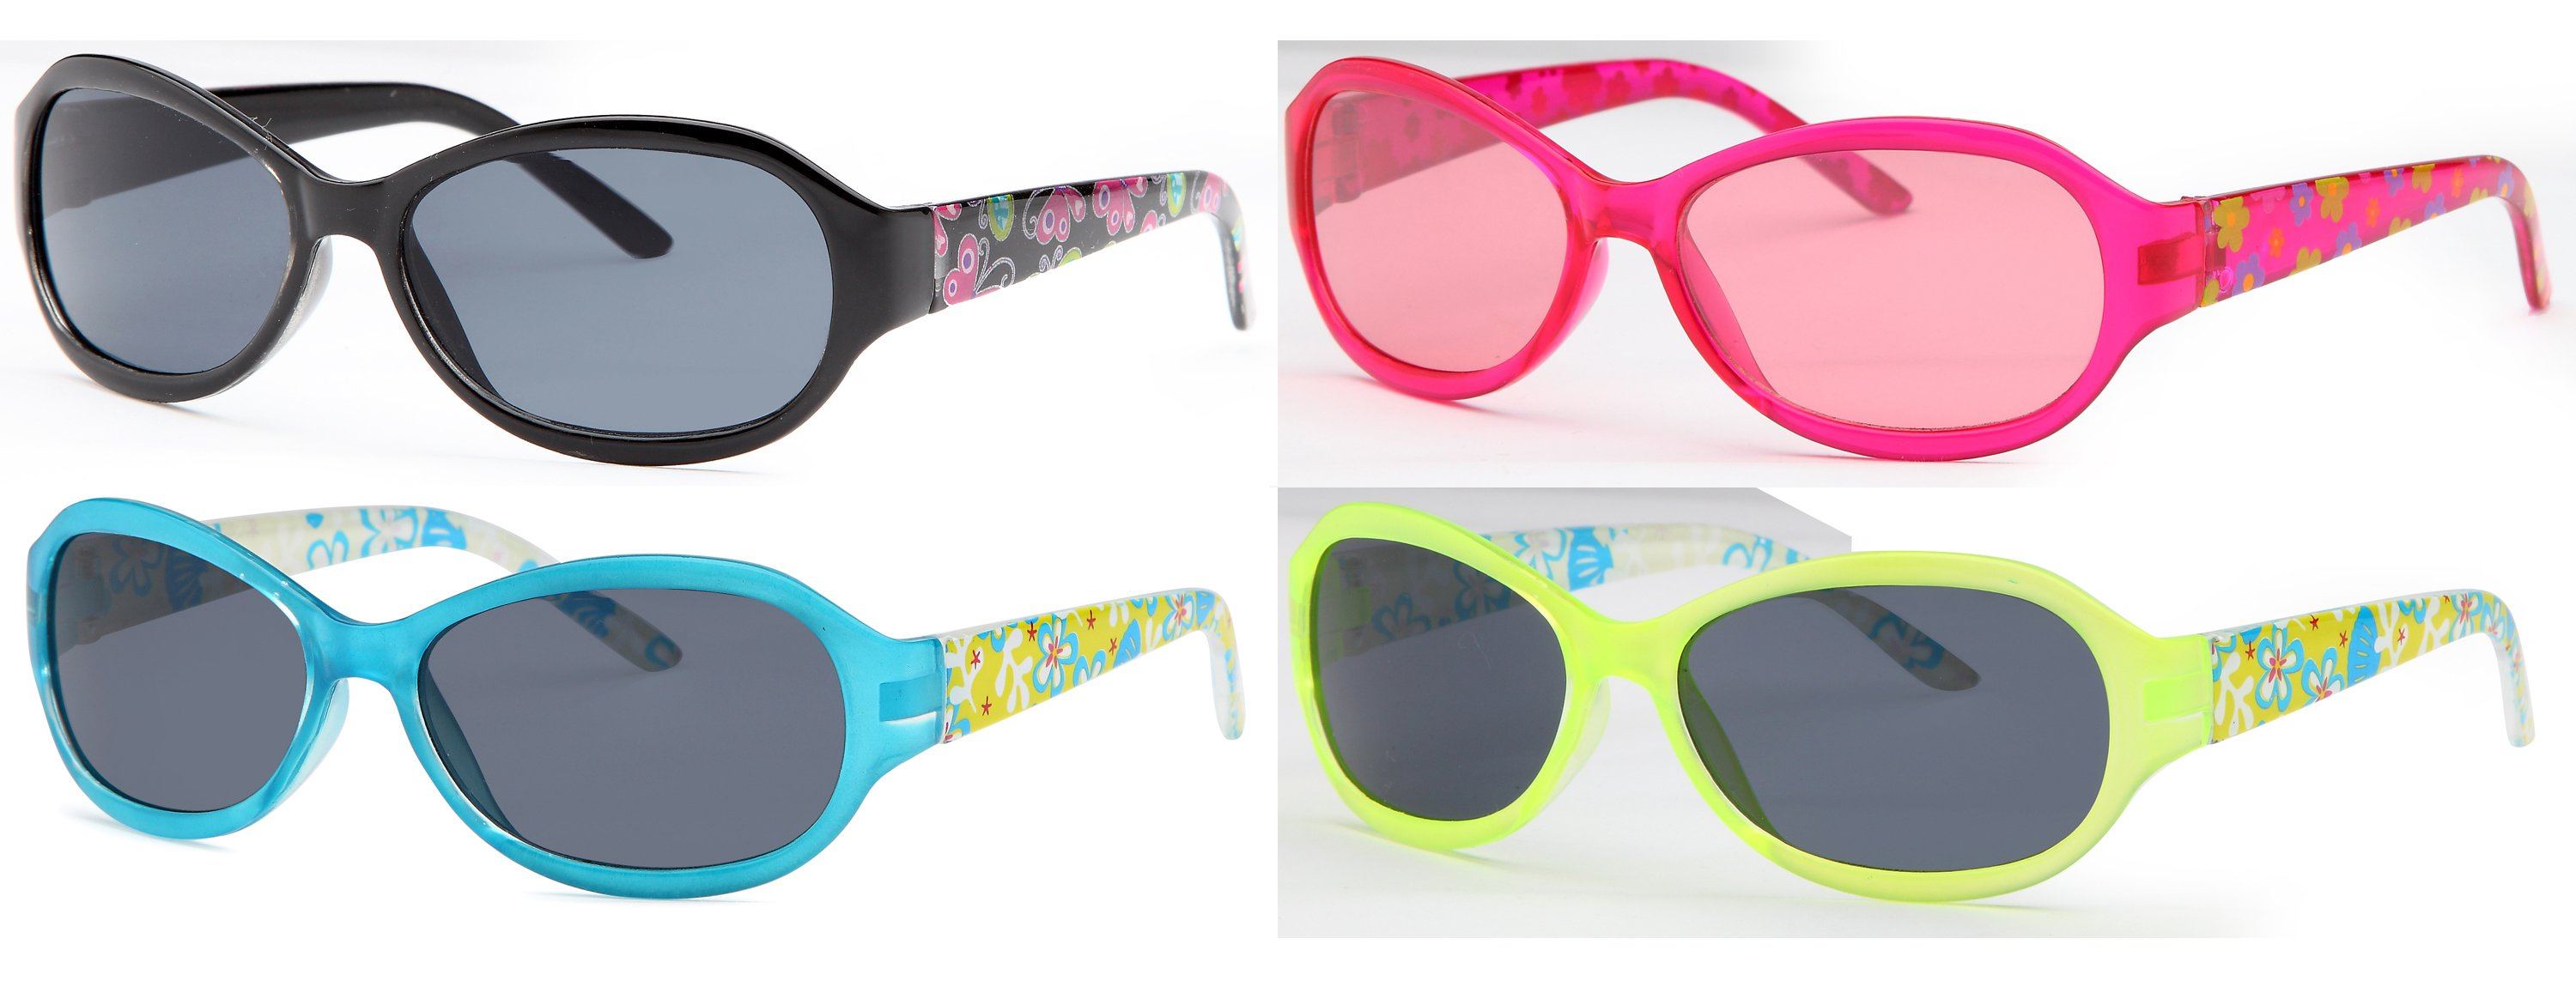 AFONiE Clear Color Kids Sunglasses - 4 Pack